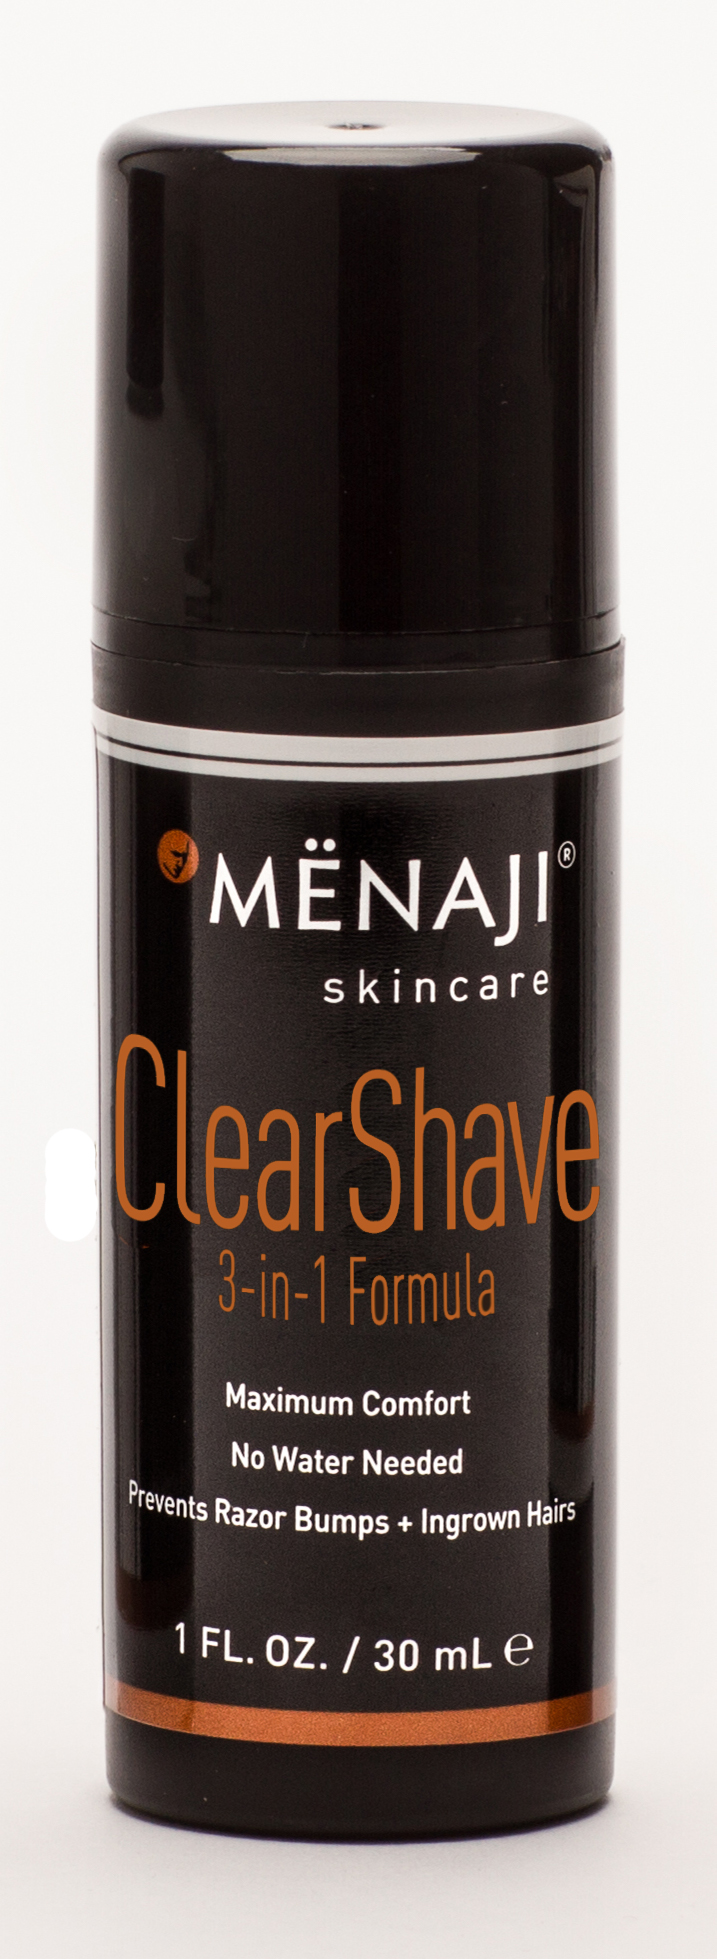 MENAJI ClearShave 3-in-1 is a multifunctional, user-friendly product that cuts grooming time in half.